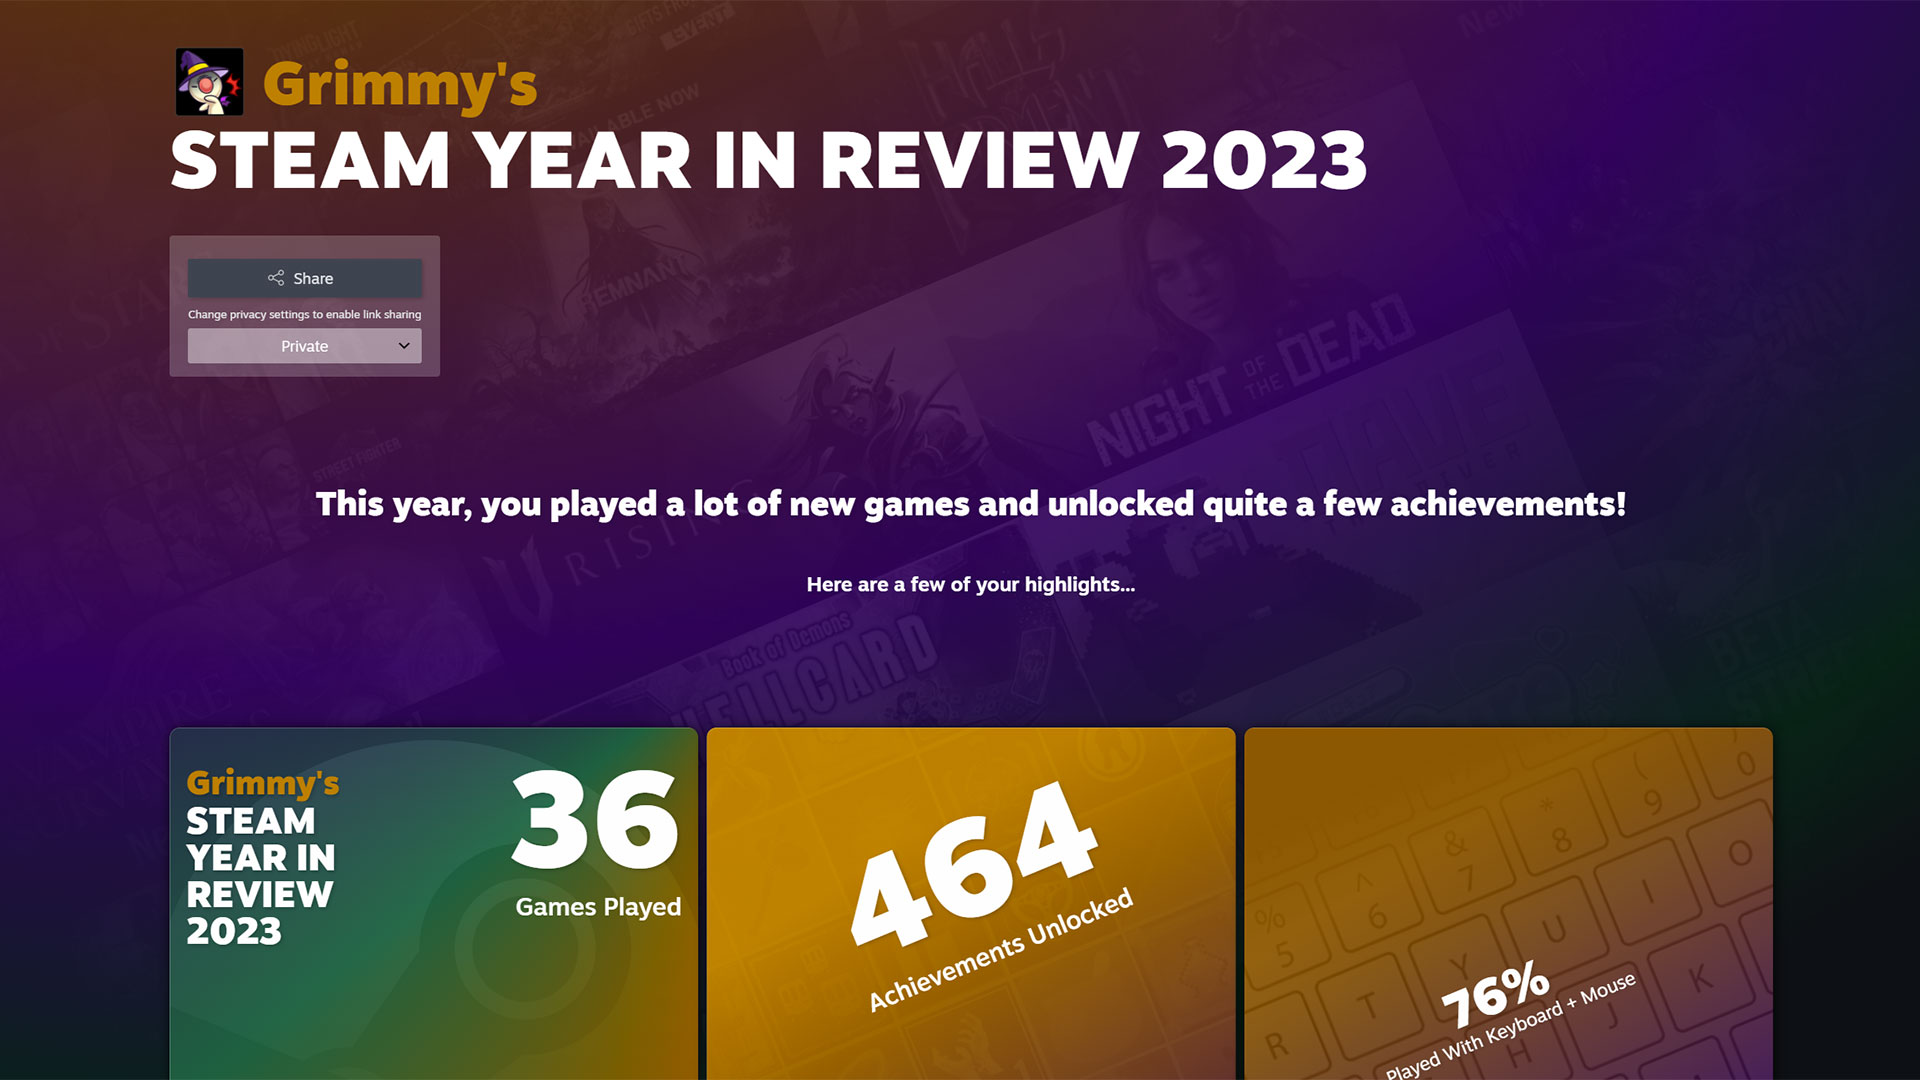 Your Steam Year in Review 2023 is now available